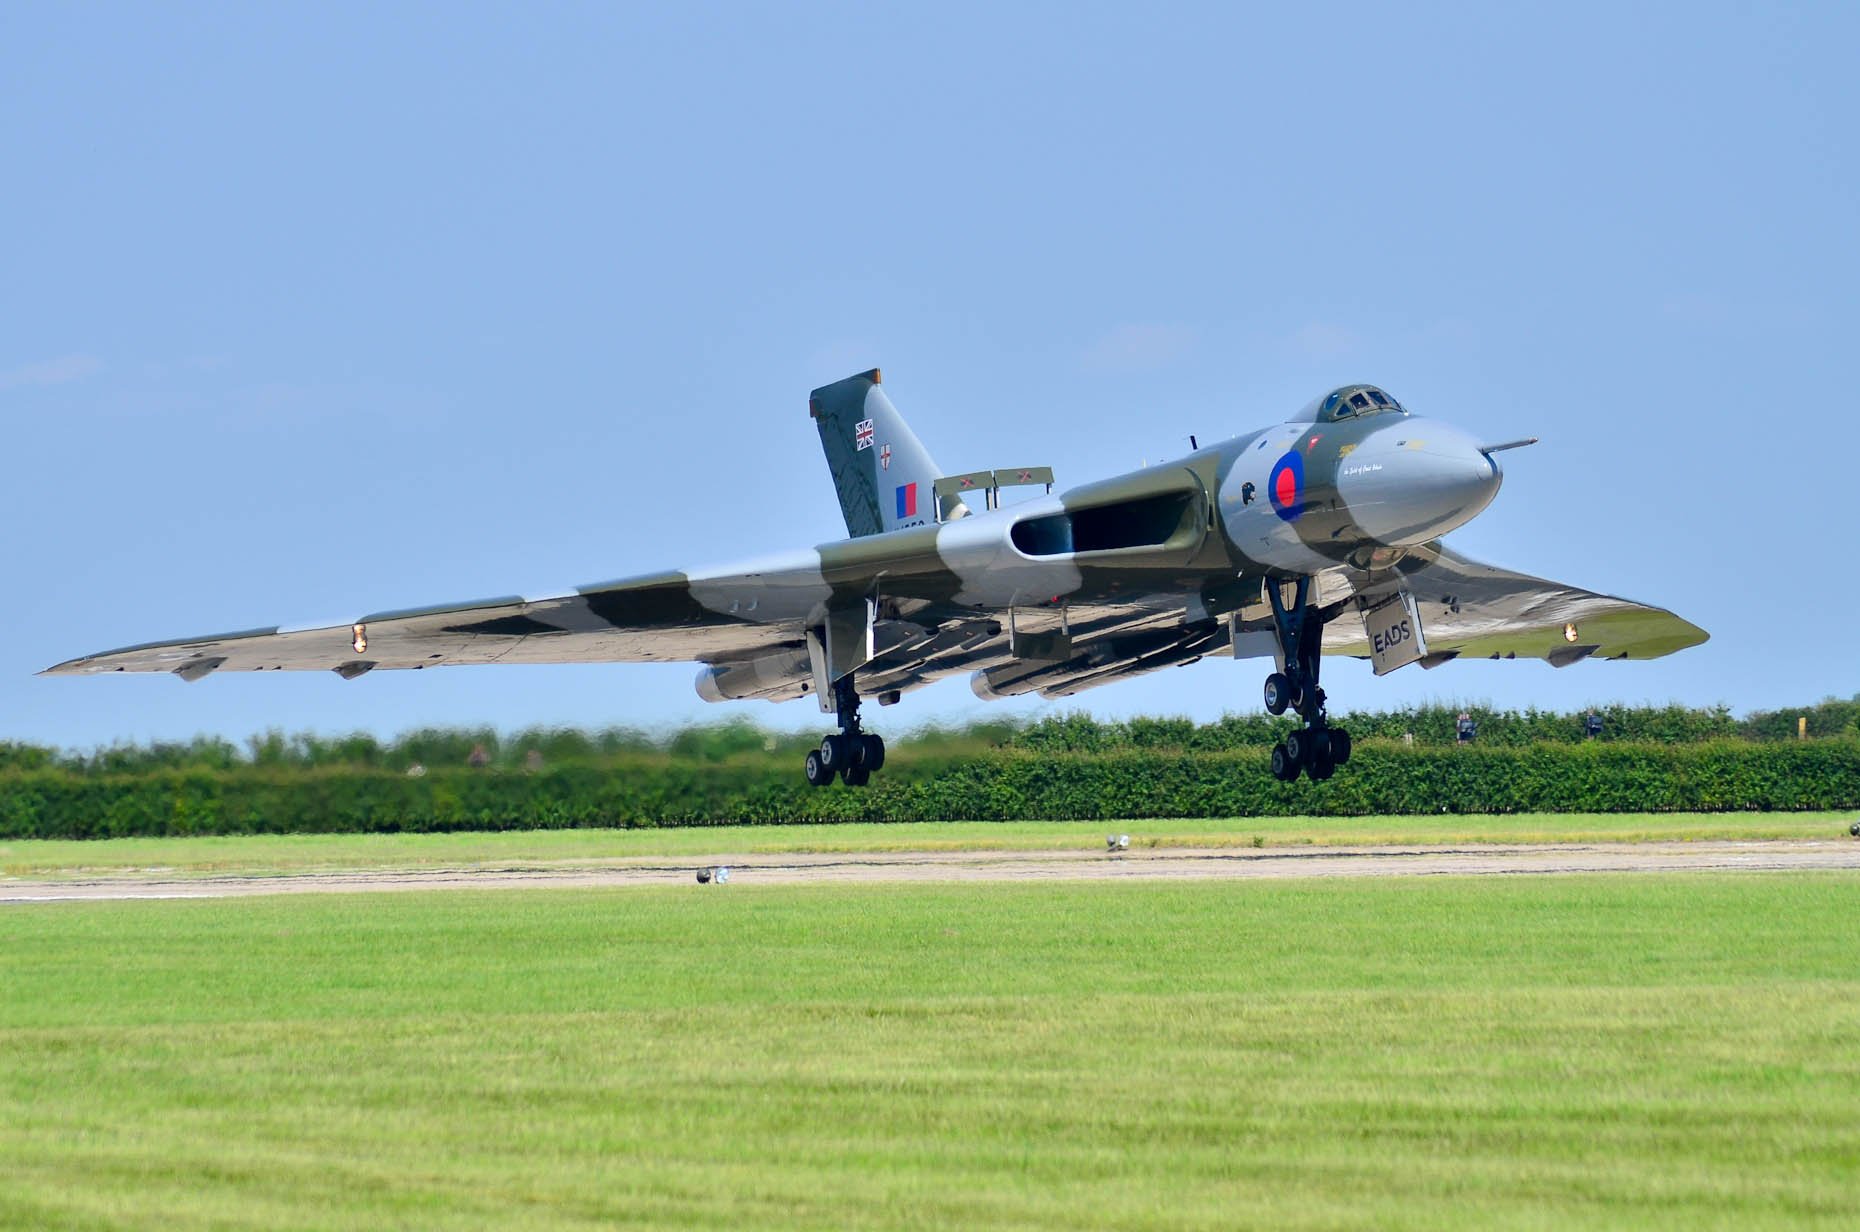 The Avro Vulcan performing at the Waddington Air Show. Photo Steve Smailes for The Lincolnite